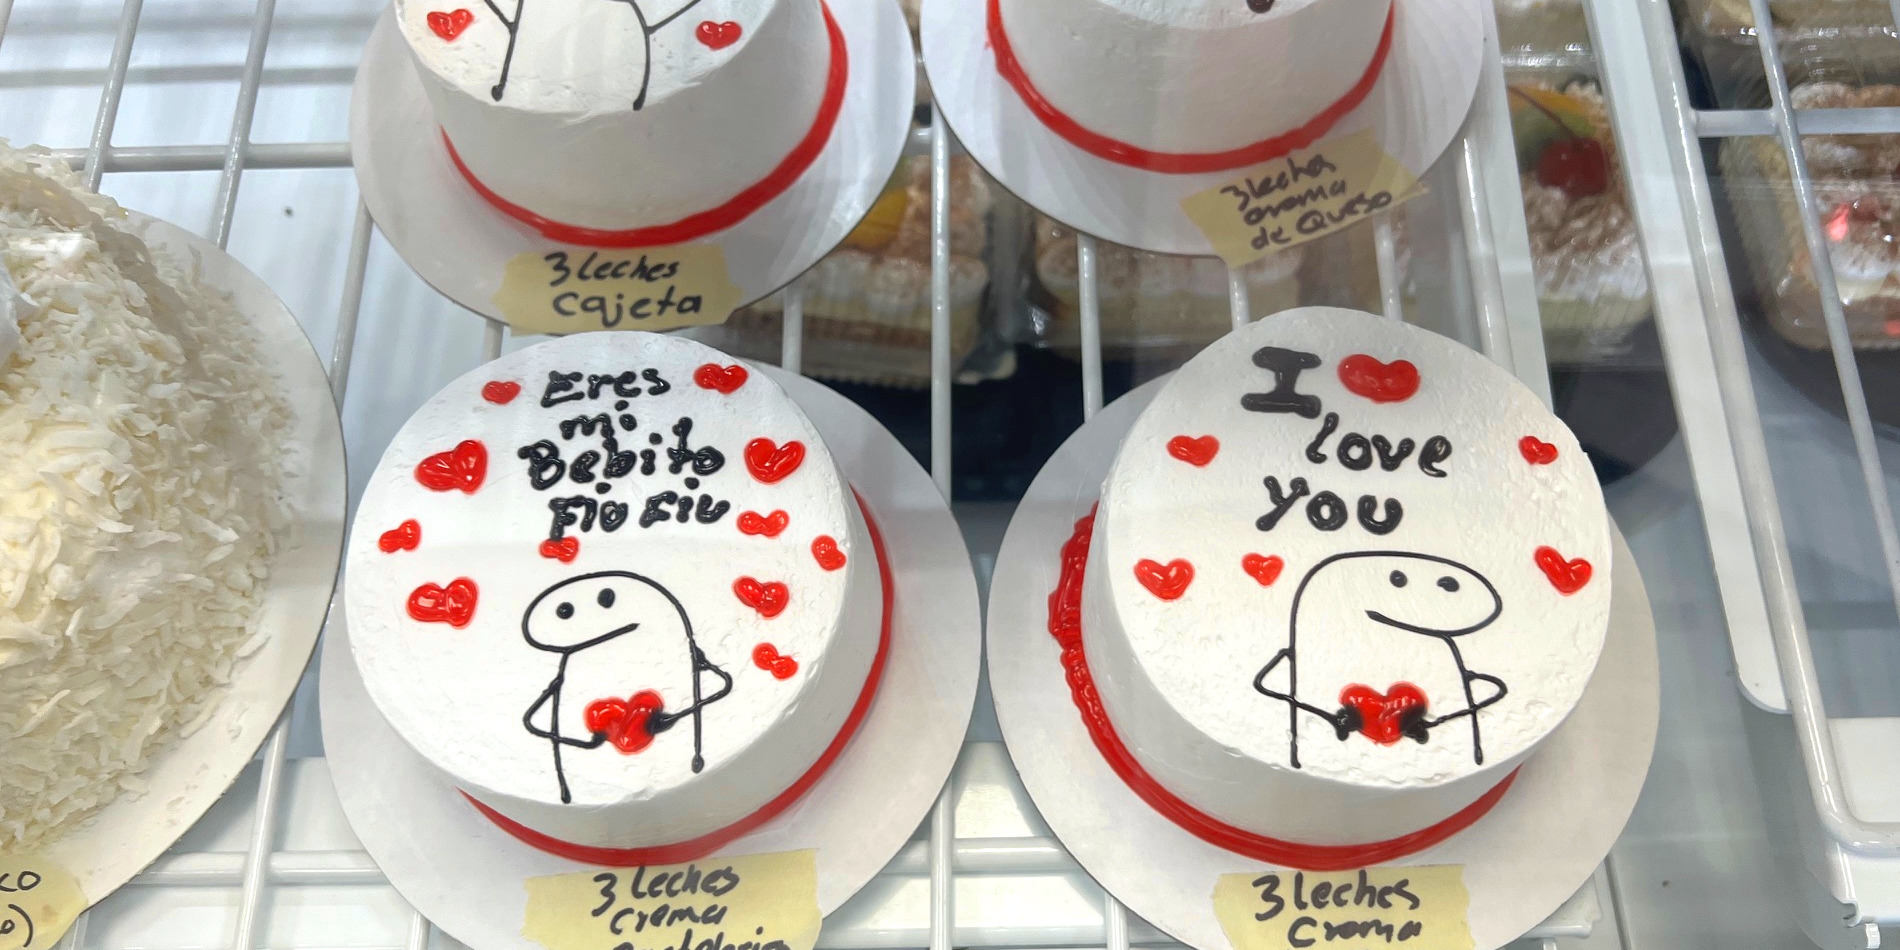 Several tres leches cakes for sale for Valentine's Day in Champaign-Urbana at San Miguel Panaderia.